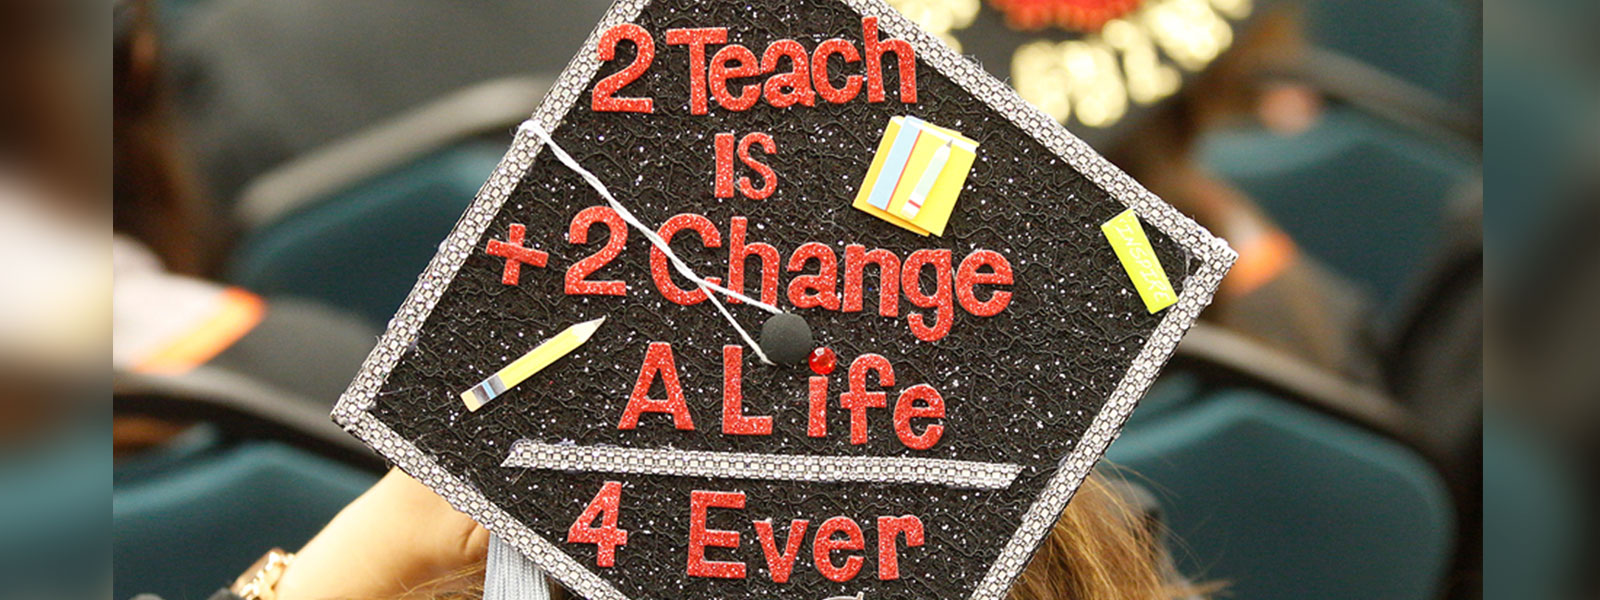 Student's graduation cap at commencement  "2 Teach is 2 Change a life 4ever"